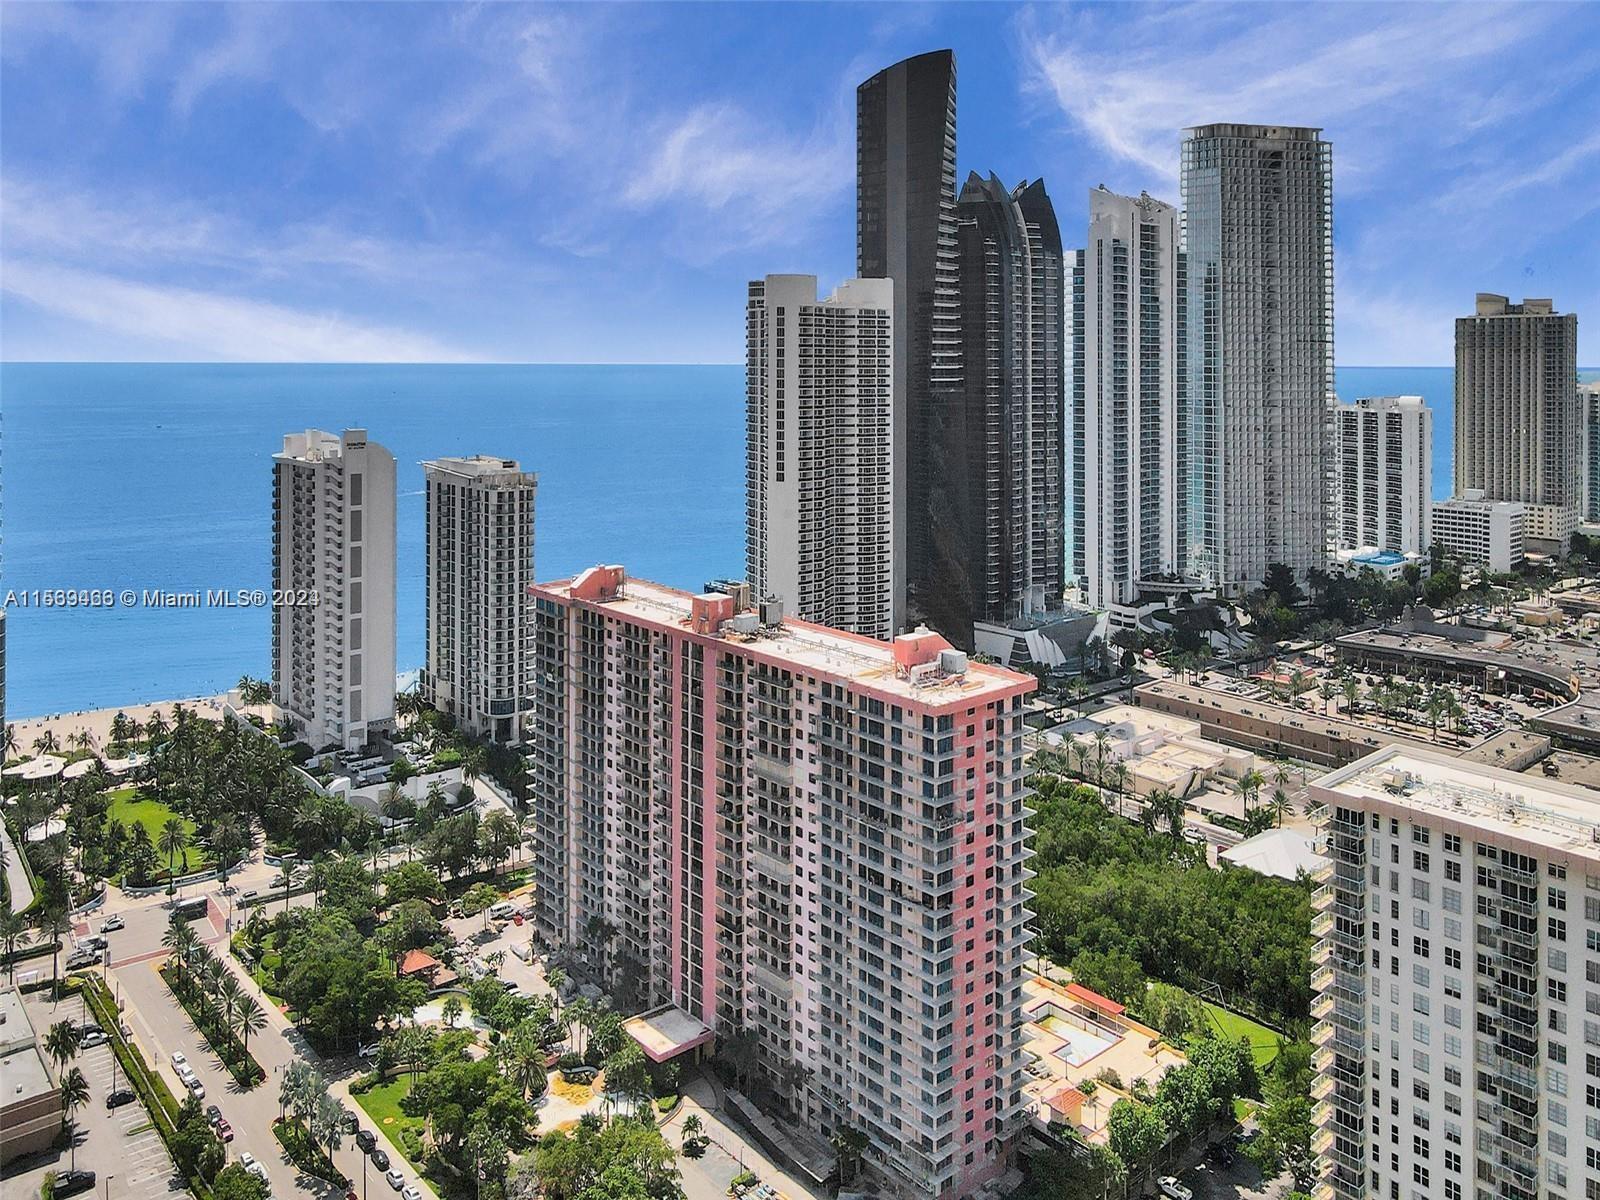 The Best Building in Winston Towers!!! Located in the prime Sunny Isles Beach area, just across the 